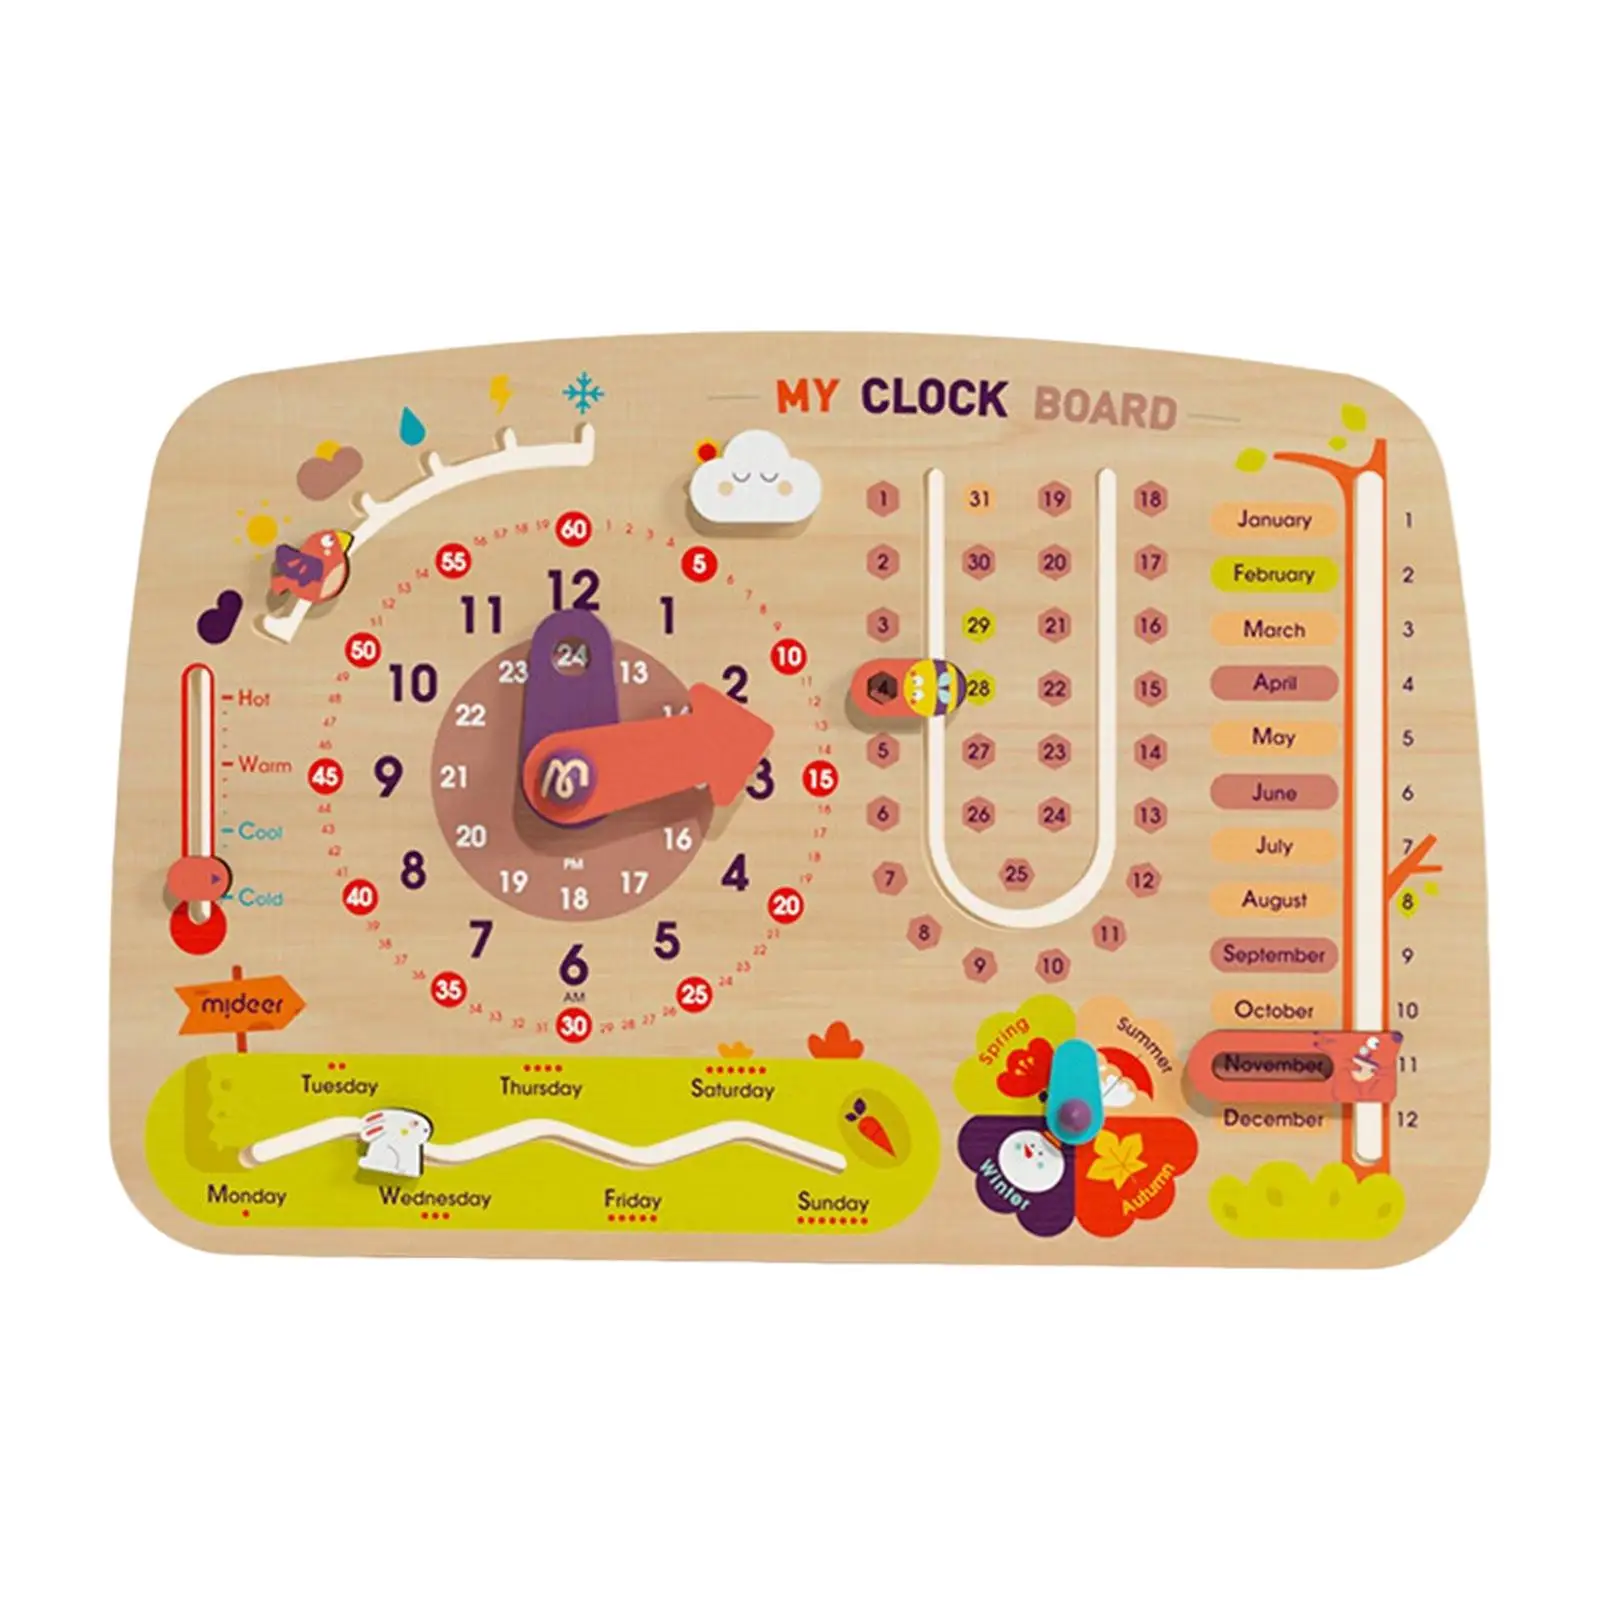 Kids Clock Calendar Teaching Clock Learning Materials for Kids Holiday Gifts